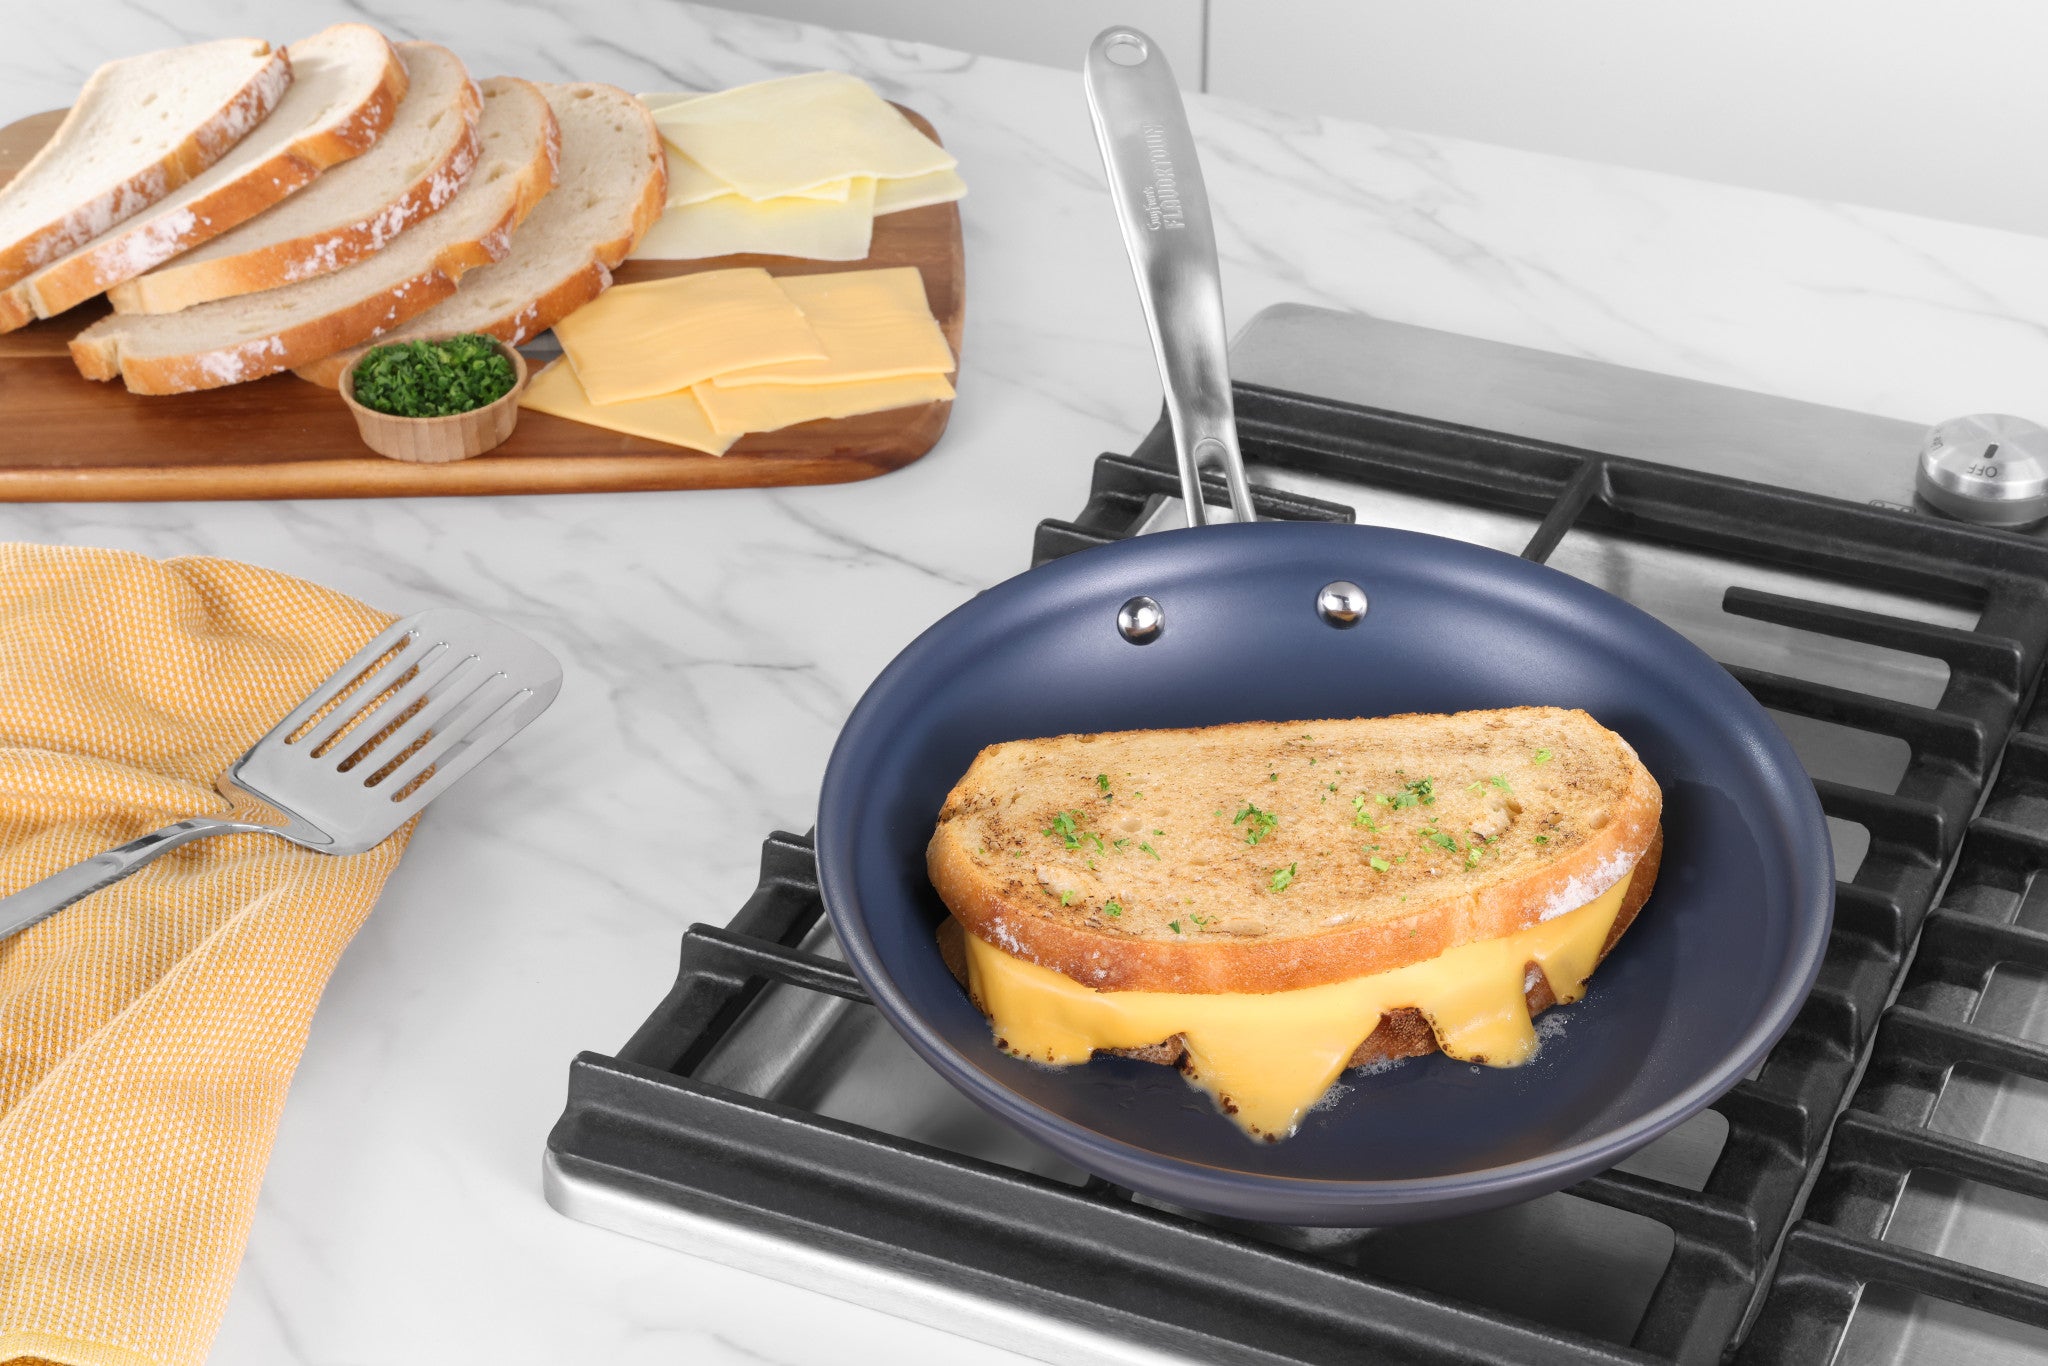 Guy Fieri's Flavortown Laser Titanium 2pcs 8.5in-10in Frying Pan Set with Grilled Cheese